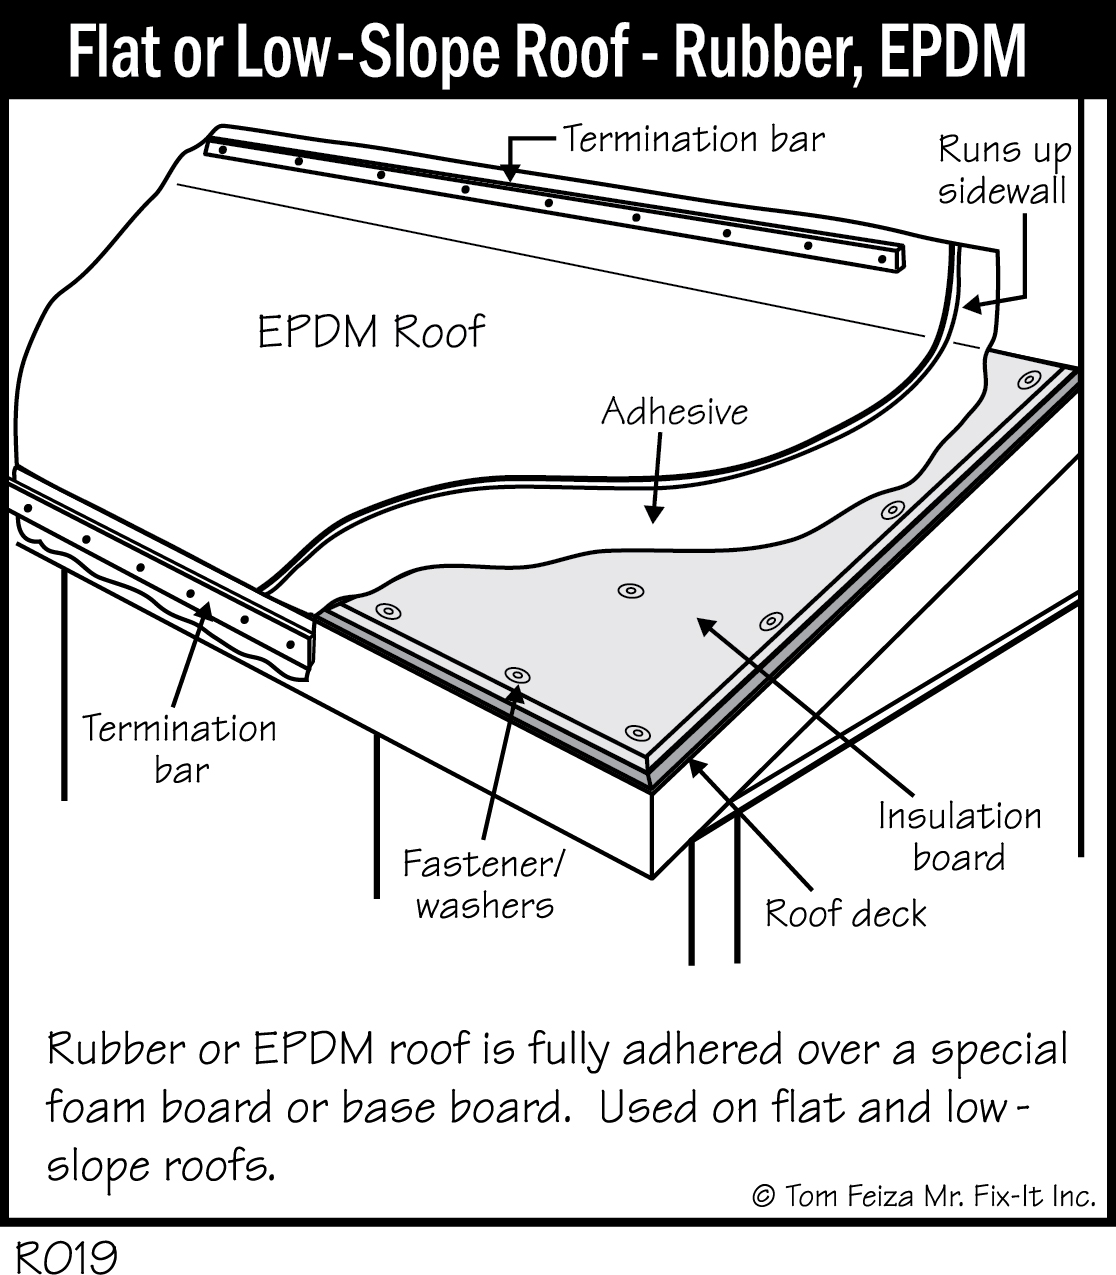 R019 - Flat or Low-Slope Roof - Rubber, EPDM